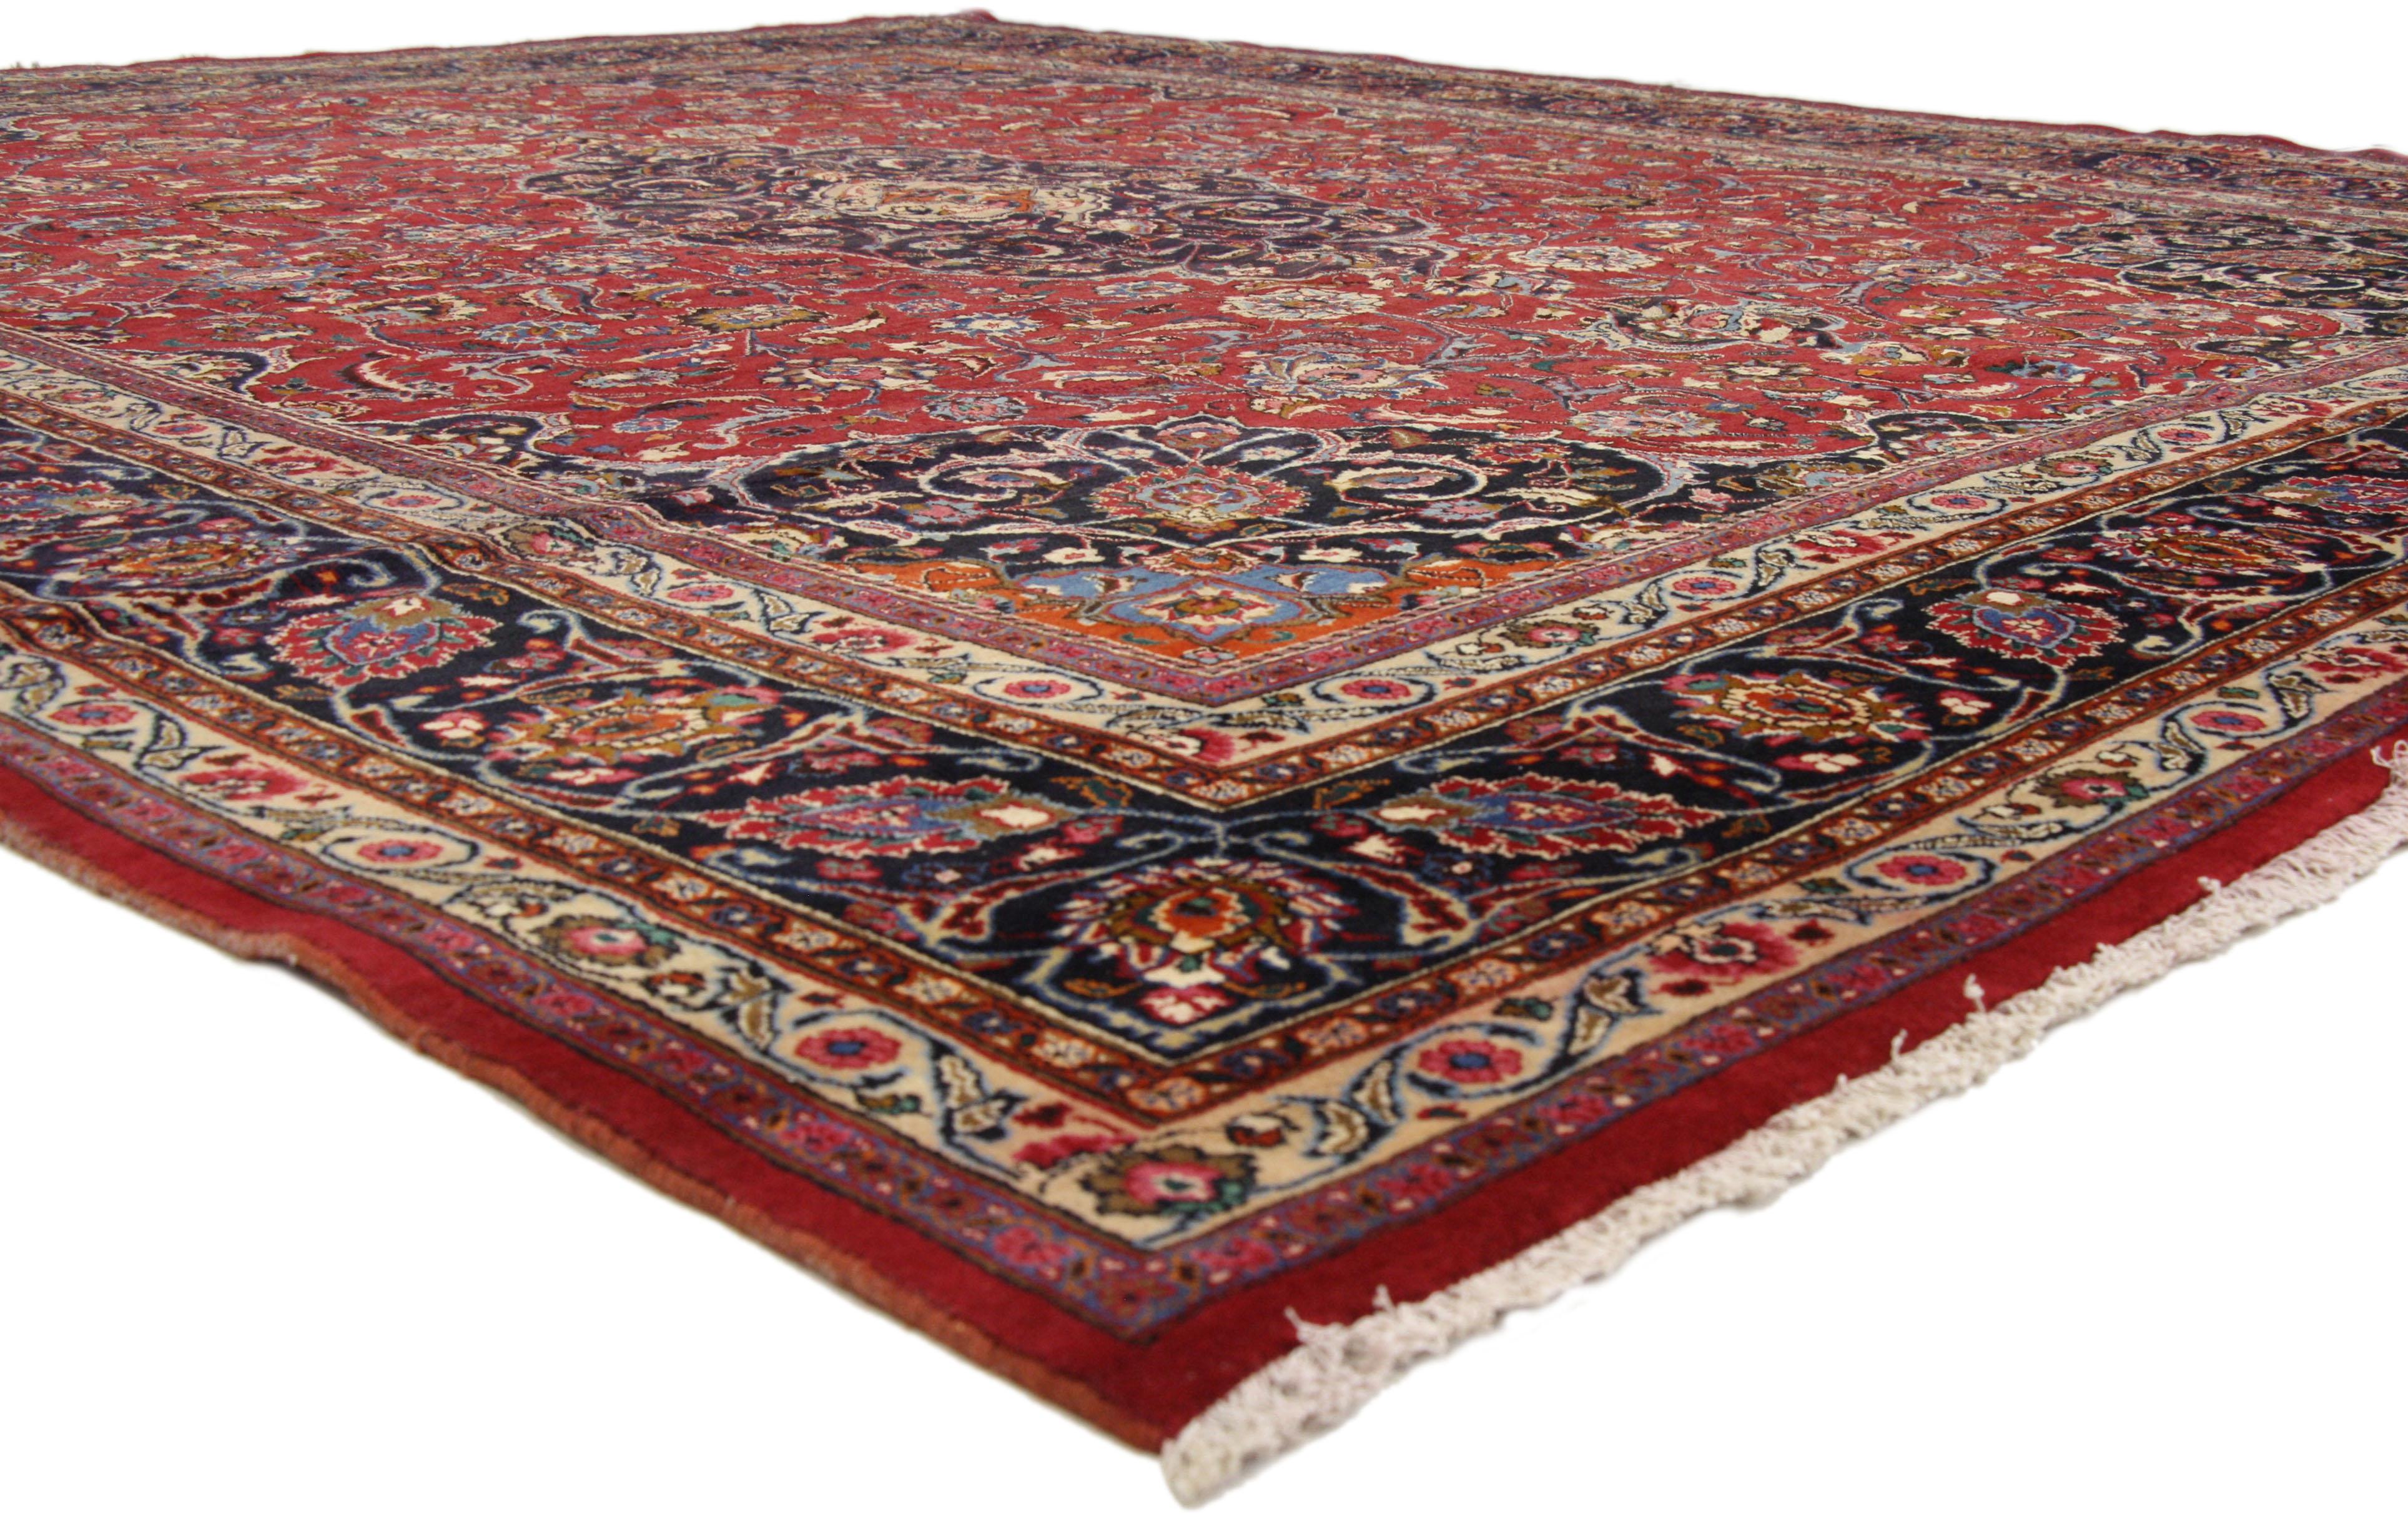 76216, vintage Persian Mashhad Area rug with traditional style. This hand-knotted wool vintage Persian Mashhad rug features a cusped Mashhad medallion in a field of palmettes, feathers, serrated leaves and blooming flowers. The central medallion is